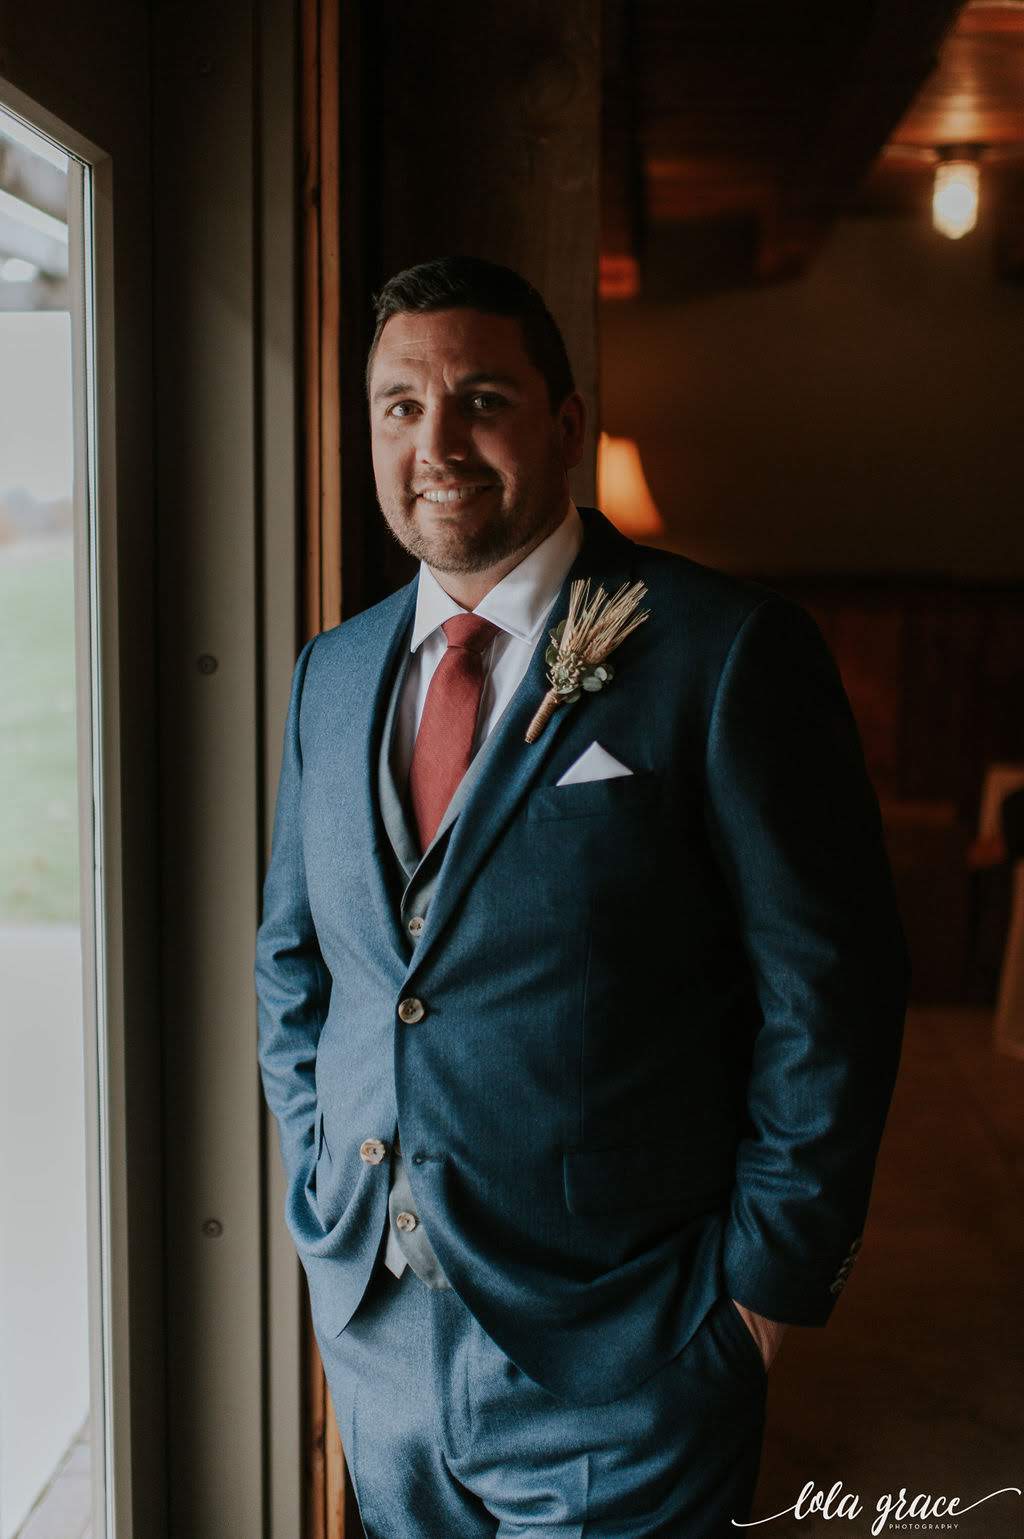 The perfect fall suit and boutonniere combo for this handsome groom.